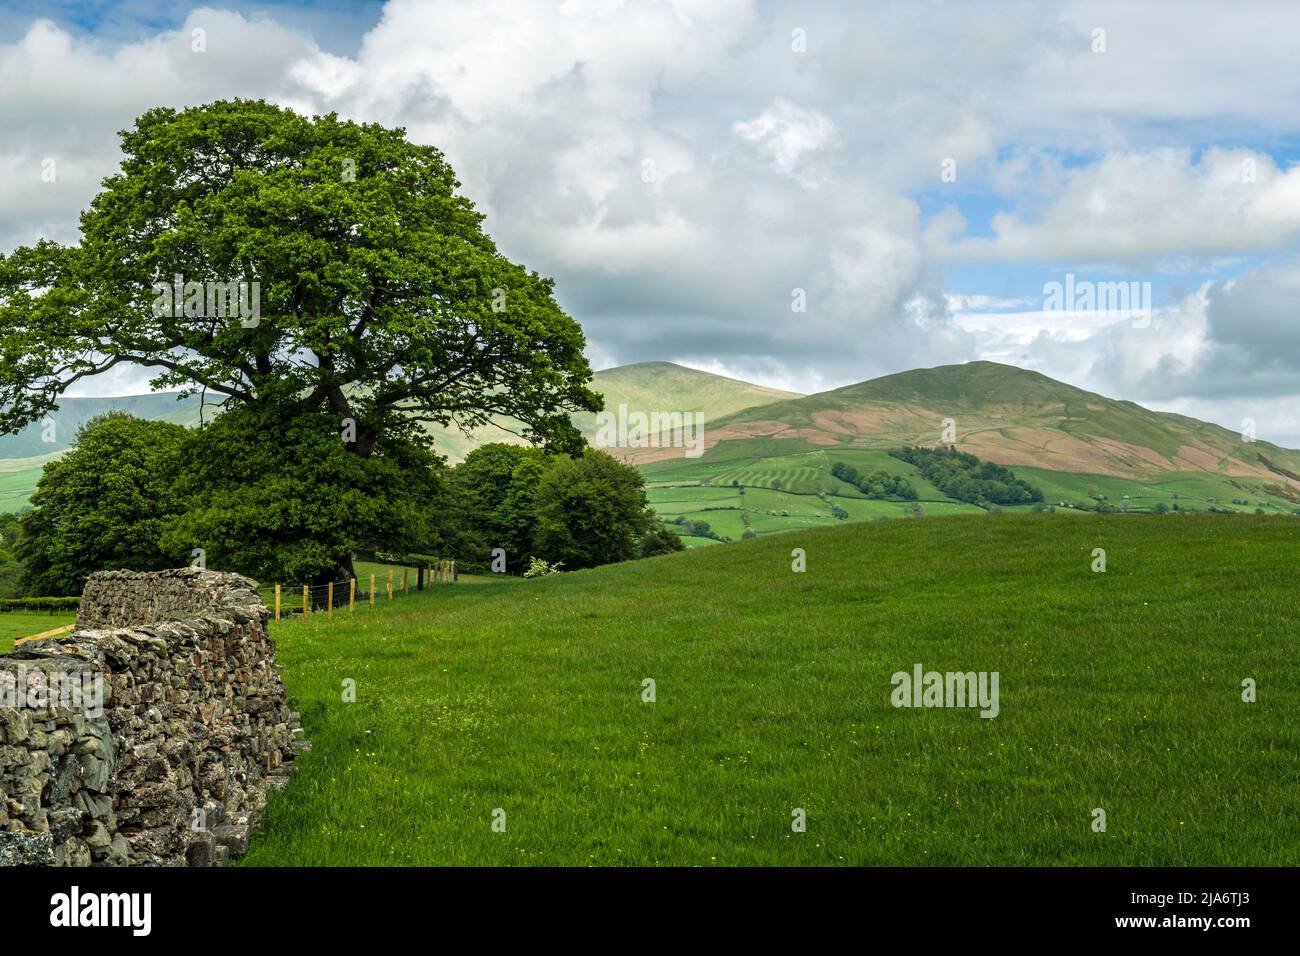 A view of Arant Haw and Winder, both fells in the Howgill Fells region - on a bright day near Sedbergh Stock Photo